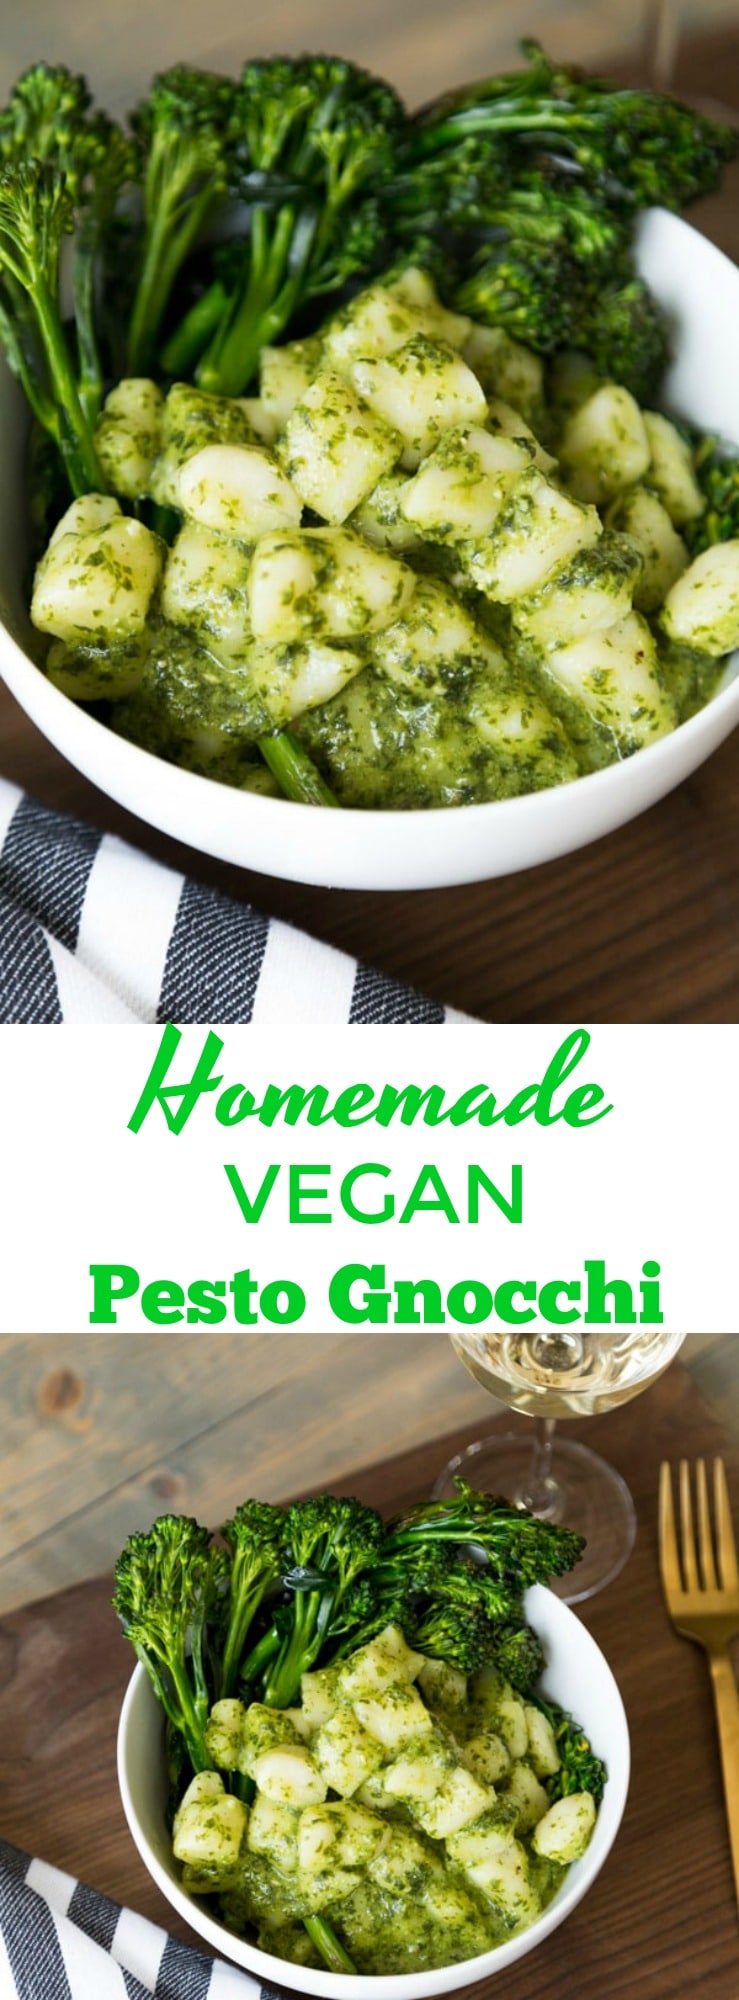 Epic Homemade Vegan Pesto Gnocchi! Melt in your mouth gnocchi is easier to make than you think. Vegan! 